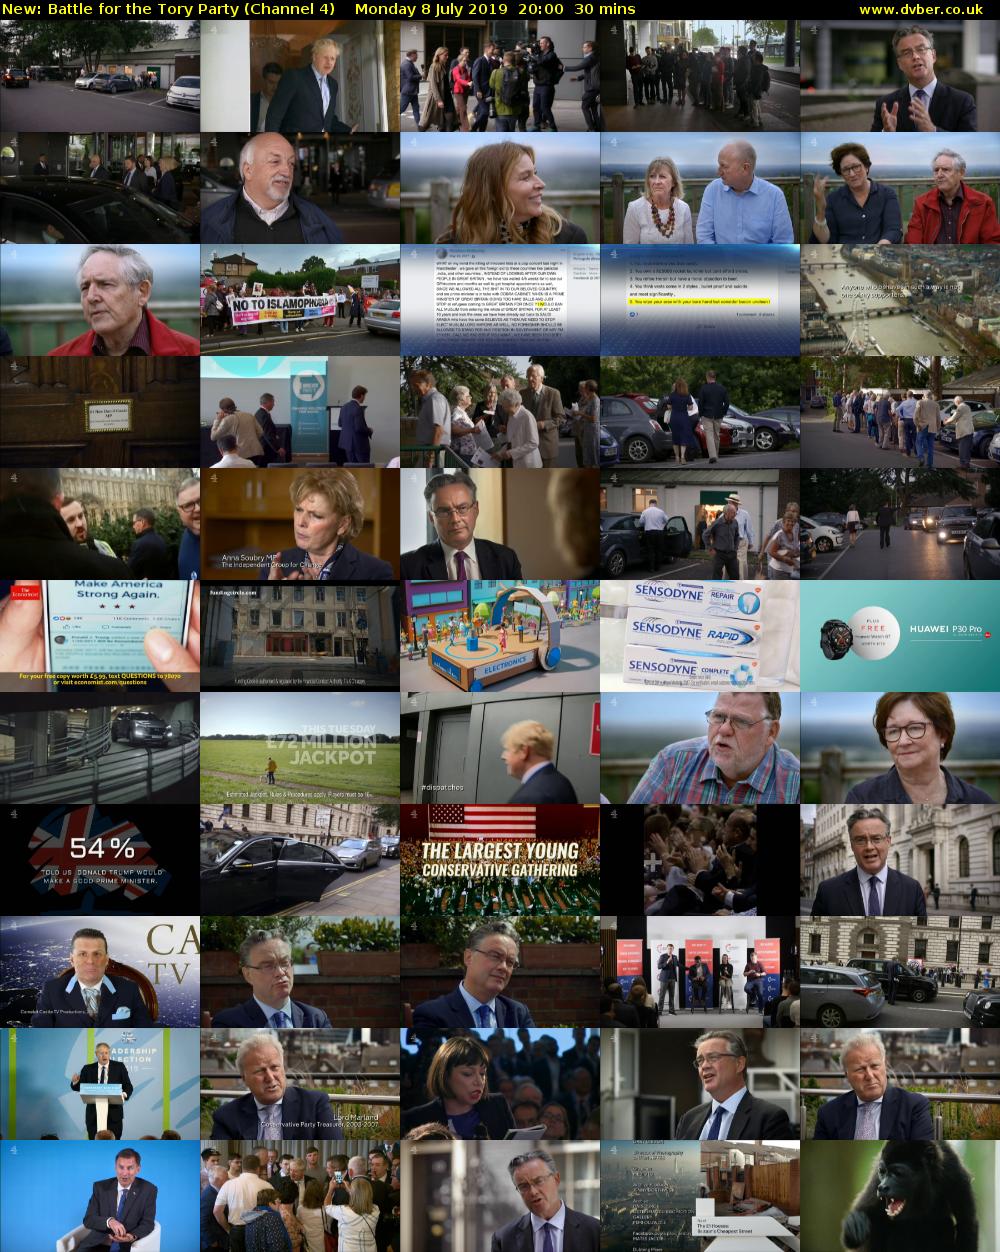 Battle for the Tory Party (Channel 4) Monday 8 July 2019 20:00 - 20:30